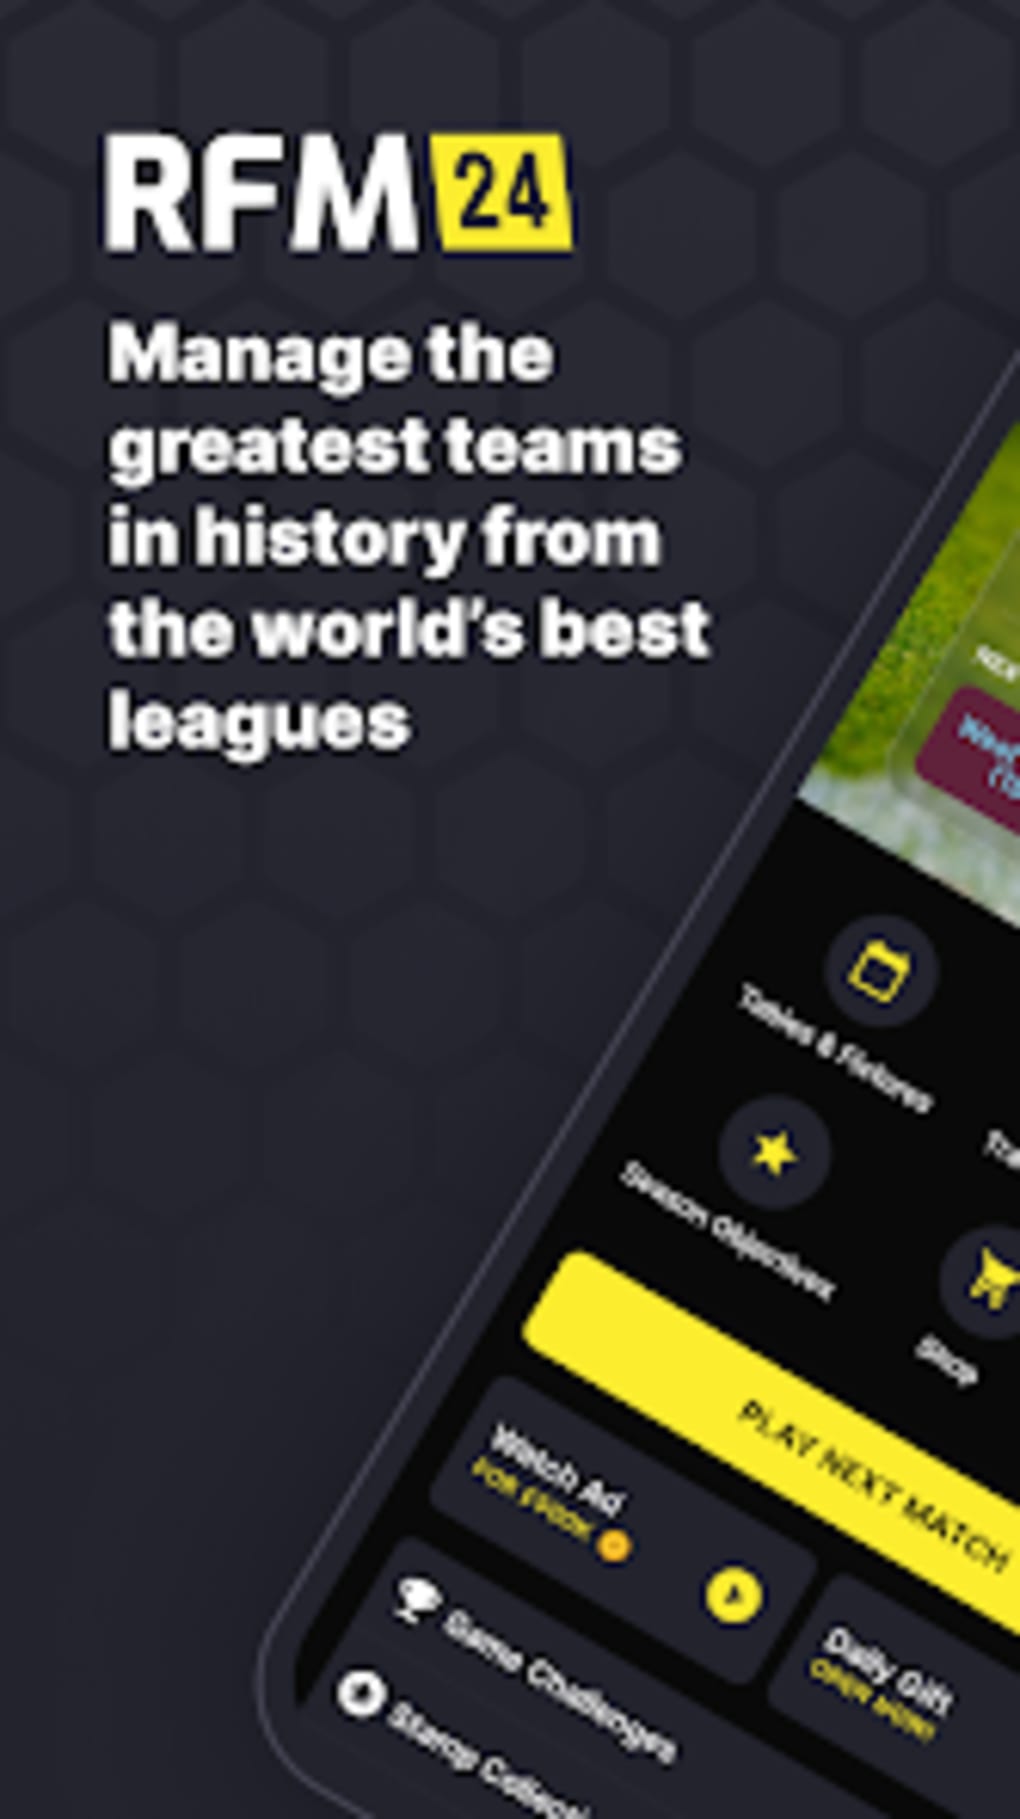 Football Manager 2024 Mobile will be free, as long as you have a